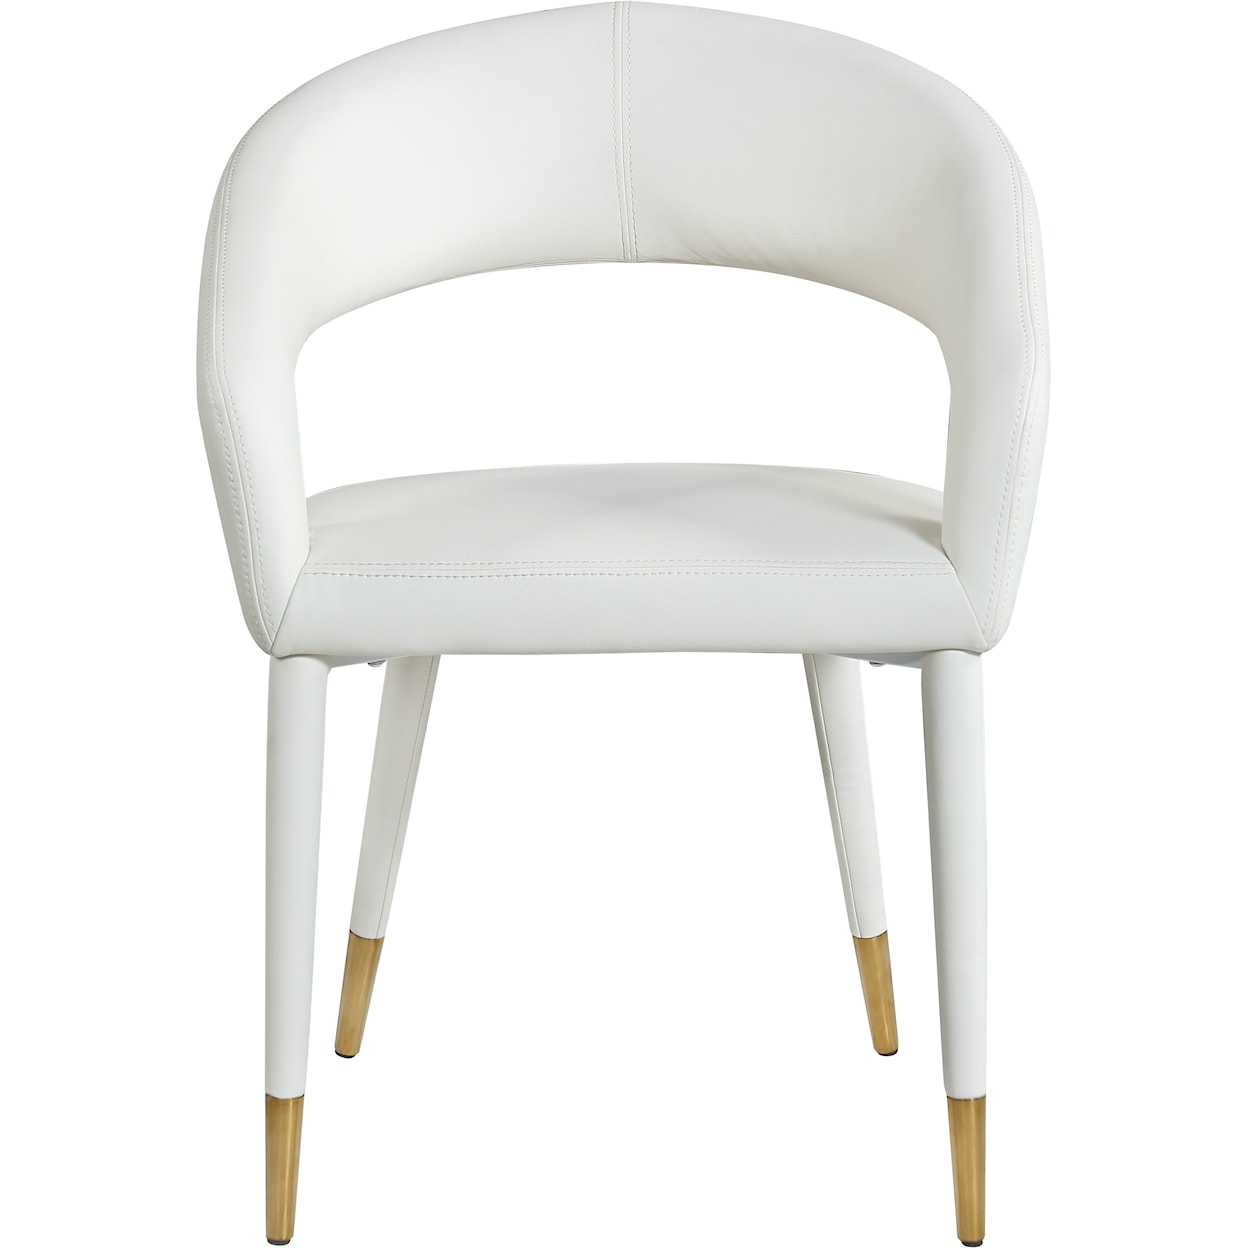 Meridian Furniture Destiny Upholstered Faux Cream Leather Dining Chair